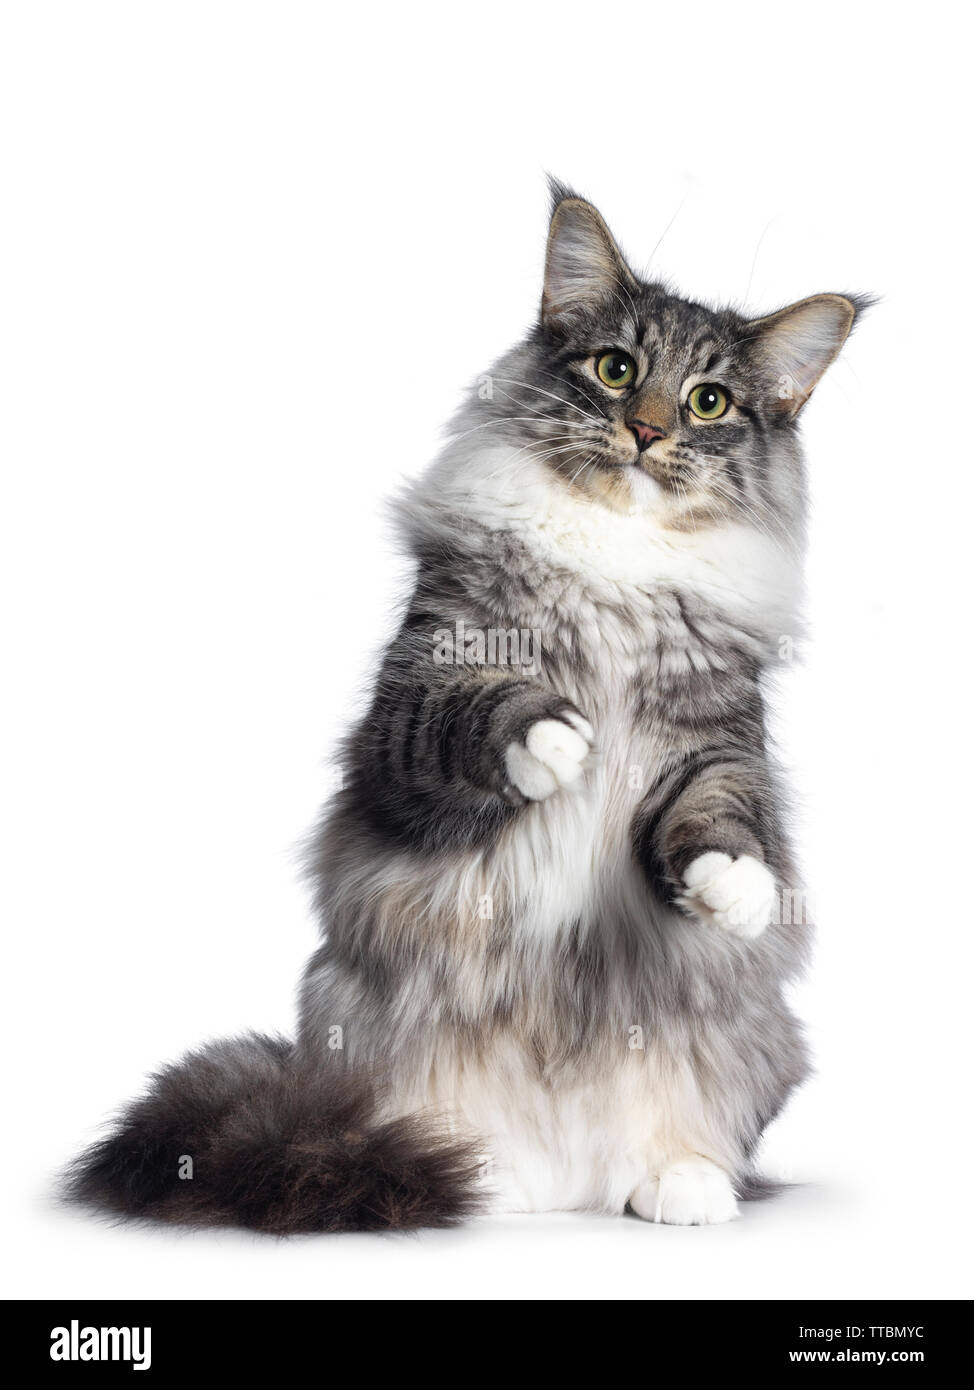 Adorable young Norwegian Forestcat, sitting on hind paws facing front. Looking curious at lens. Isolated on white background. Stock Photo